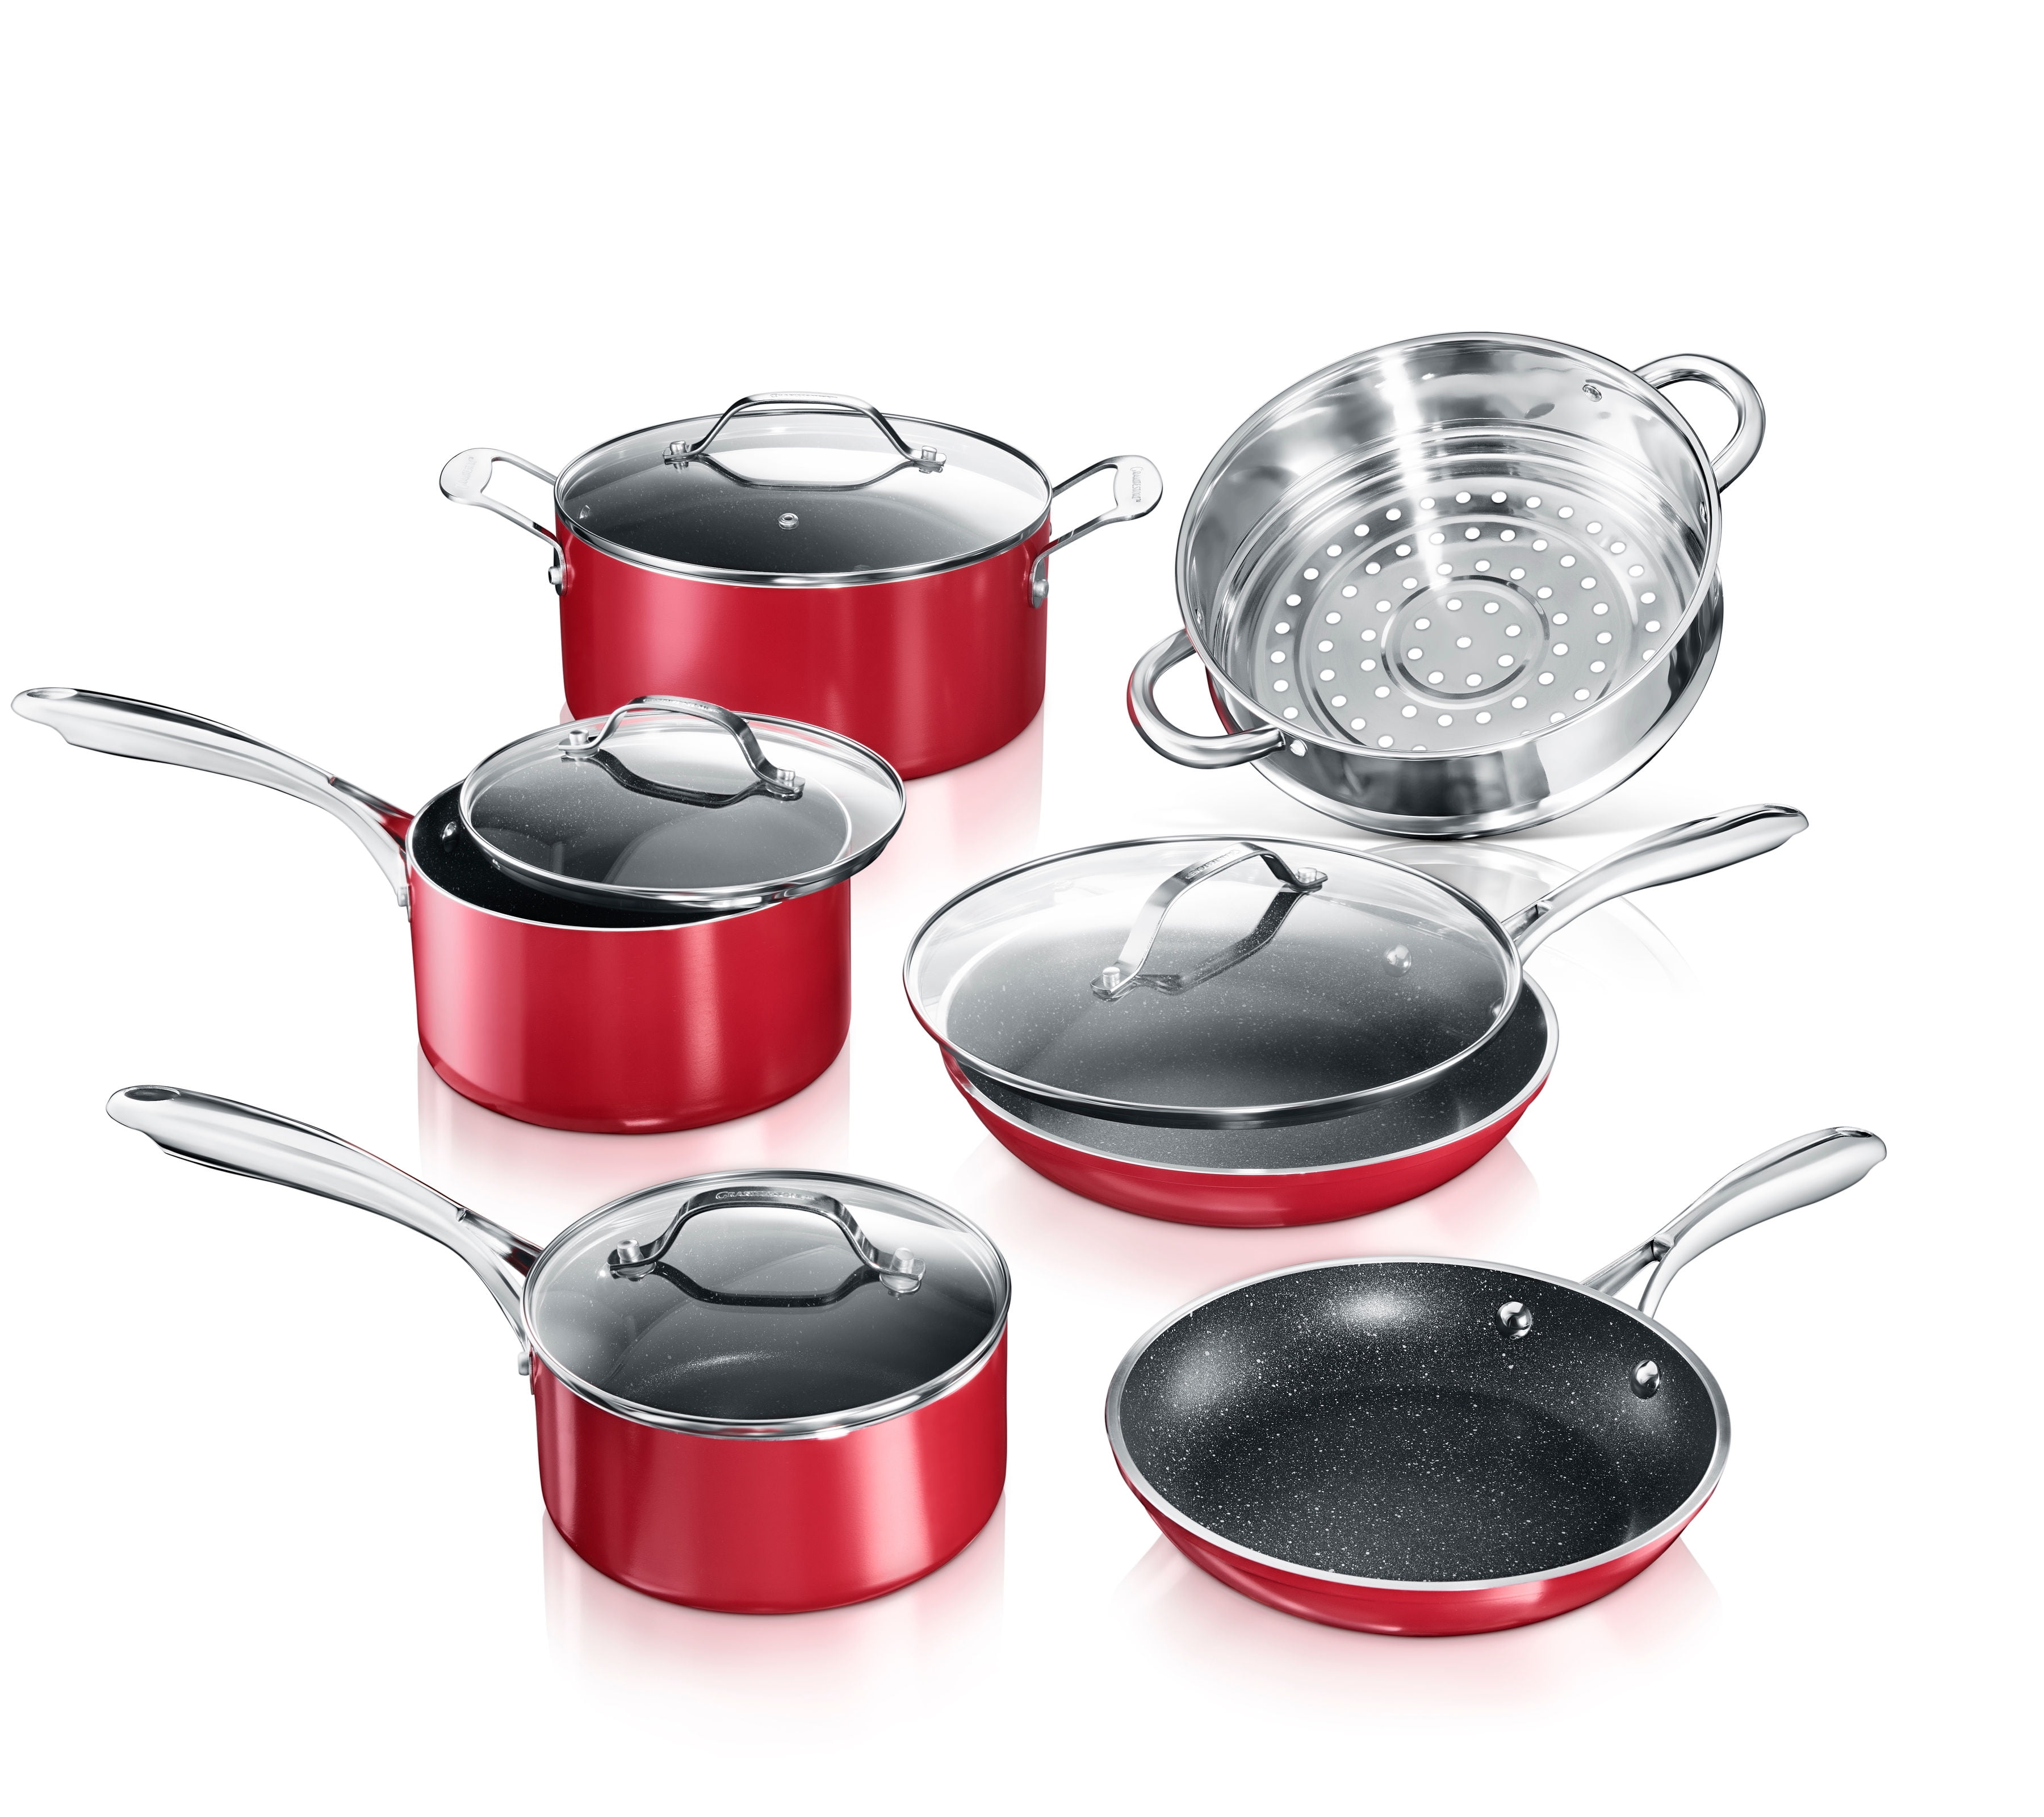 VIRAL COOKWARE SETS ON SALE!! 🔥 🍳Carote Granite Cookware Sets as Low as  $34.99 (Reg. $100) 🔗 LINK IN BIO @thefreebieguy - click the…